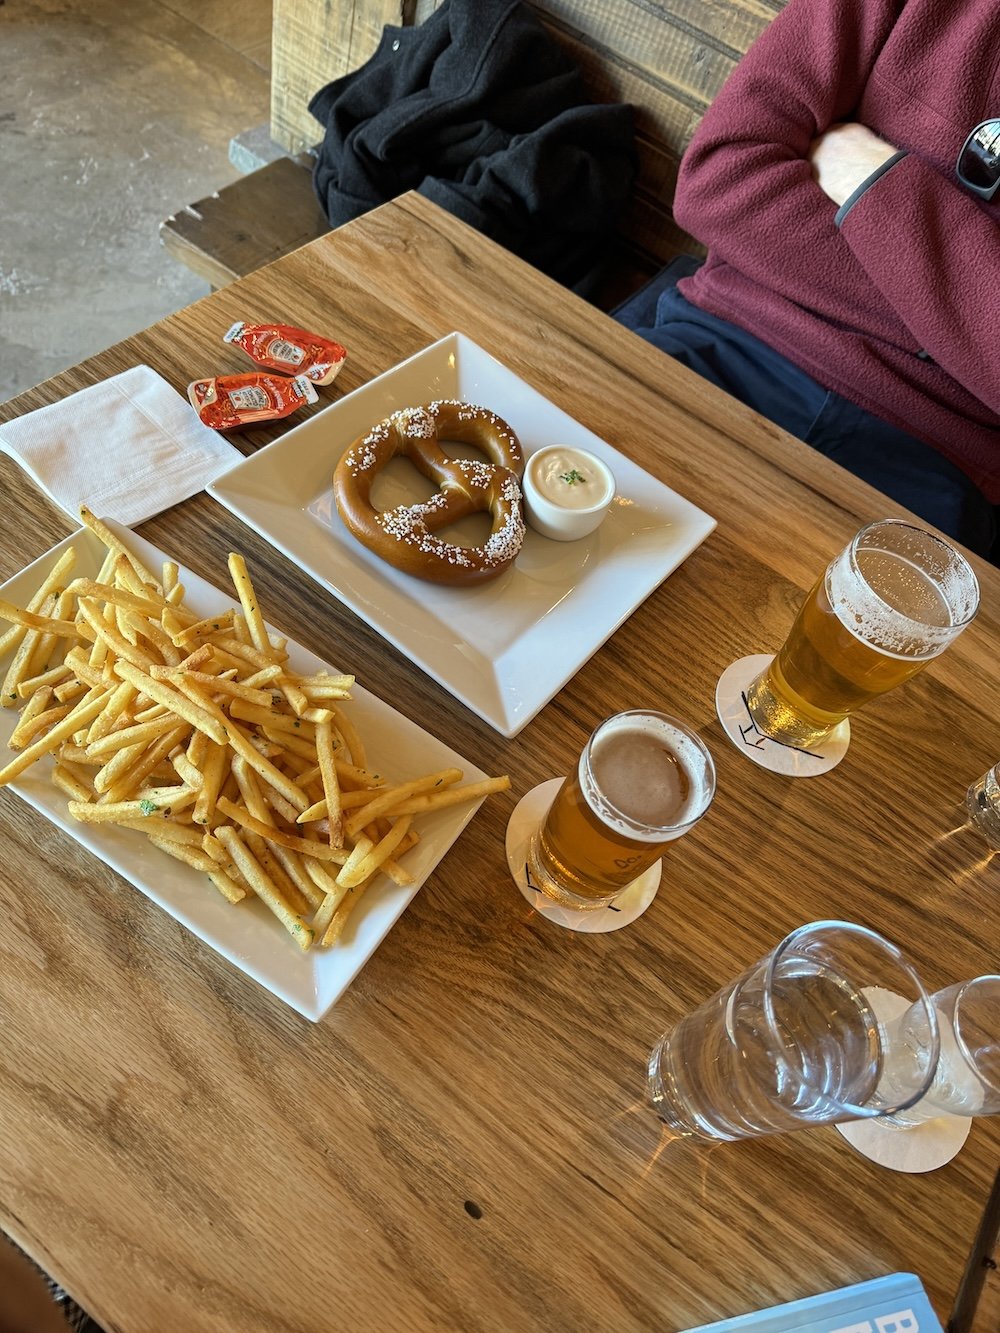 drinks and food served at Union Street Brewing Co.